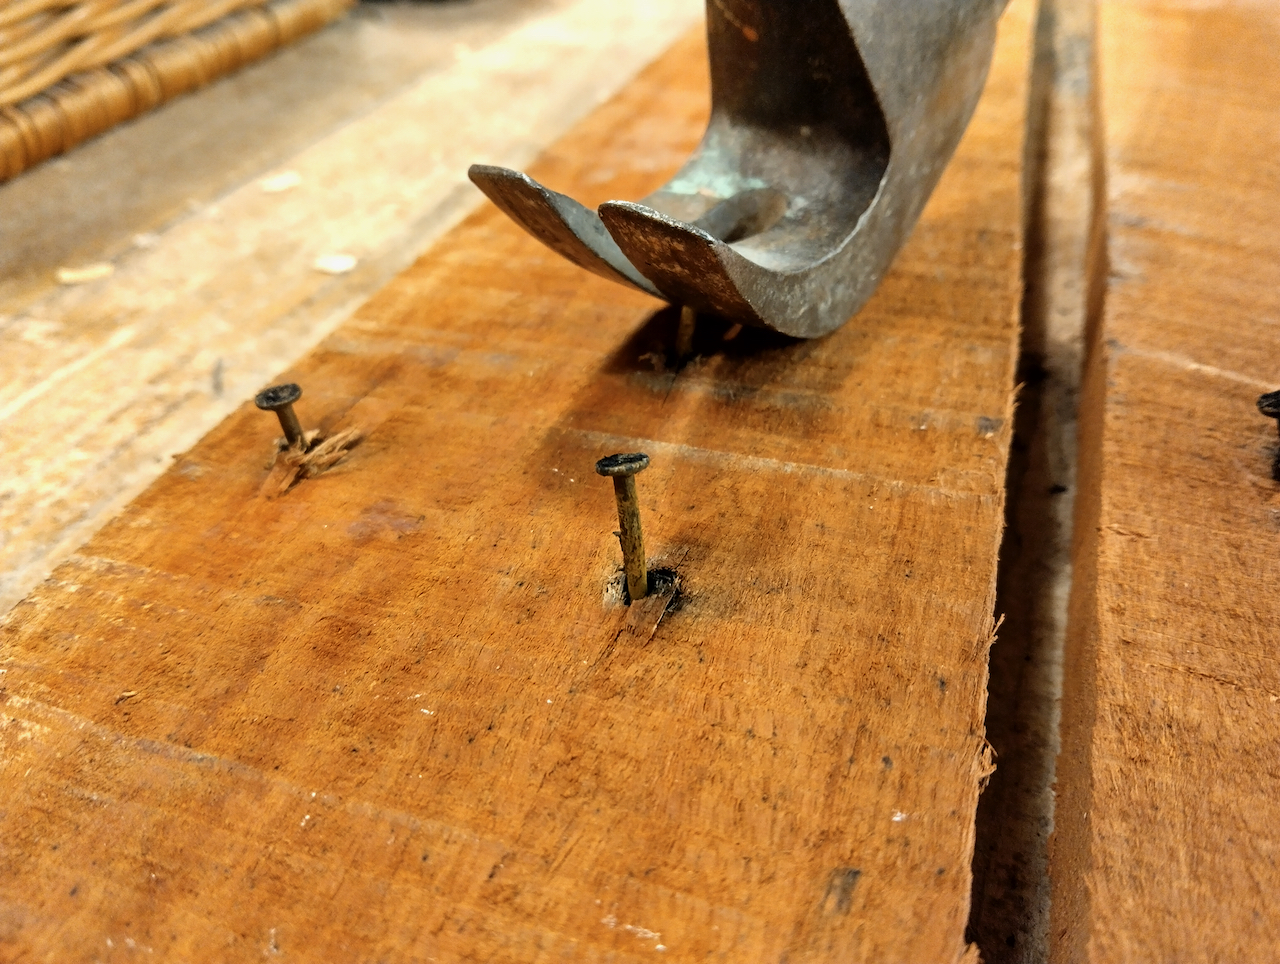 Yoav uses a hammer to pry nails loose from a reclaimed board.